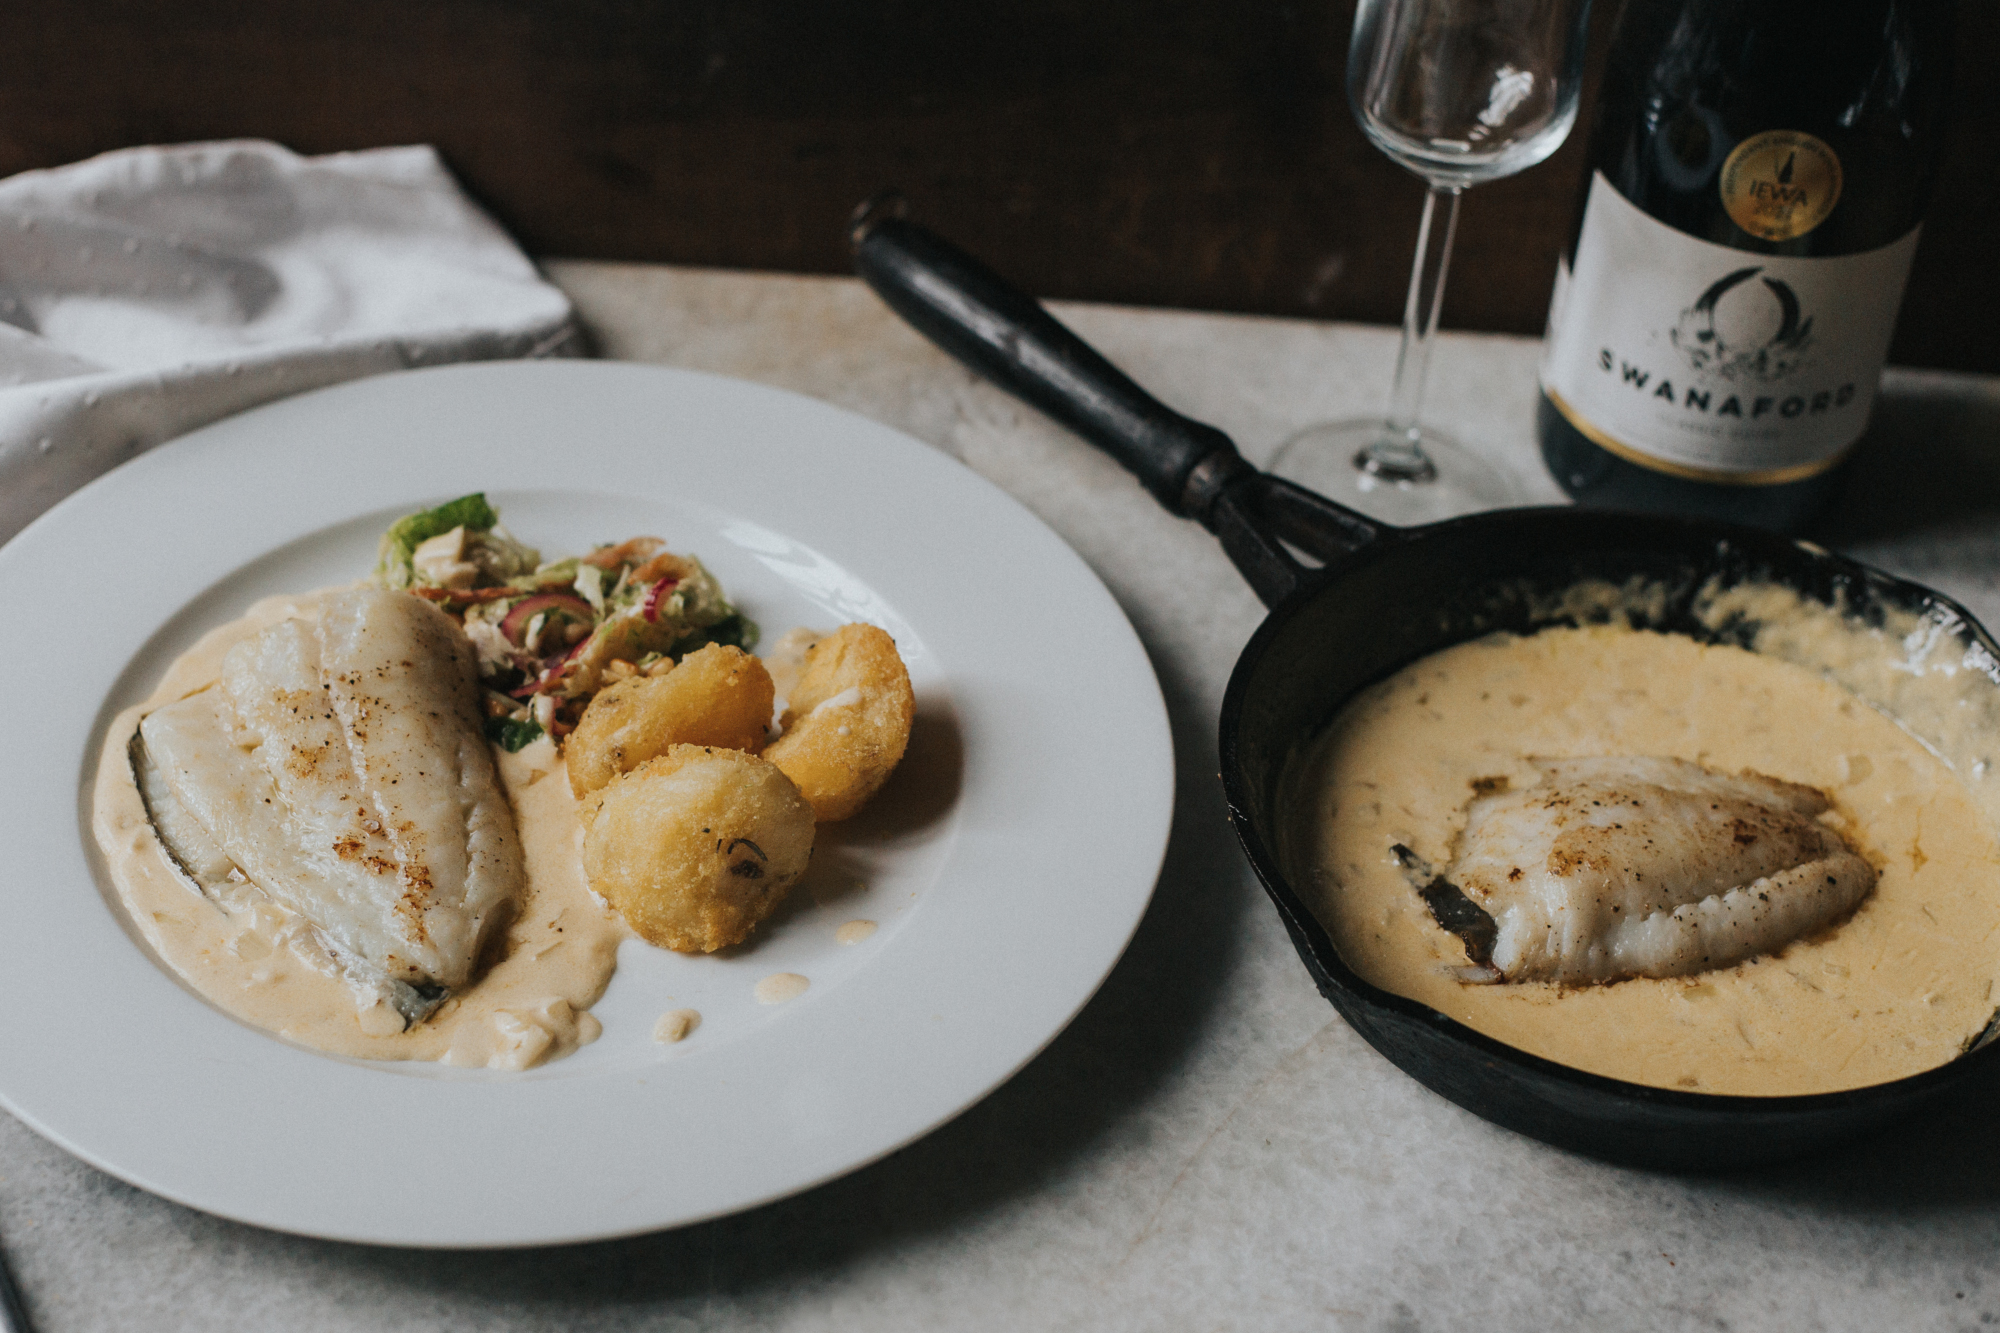 Greendale Turbot with Prosecco